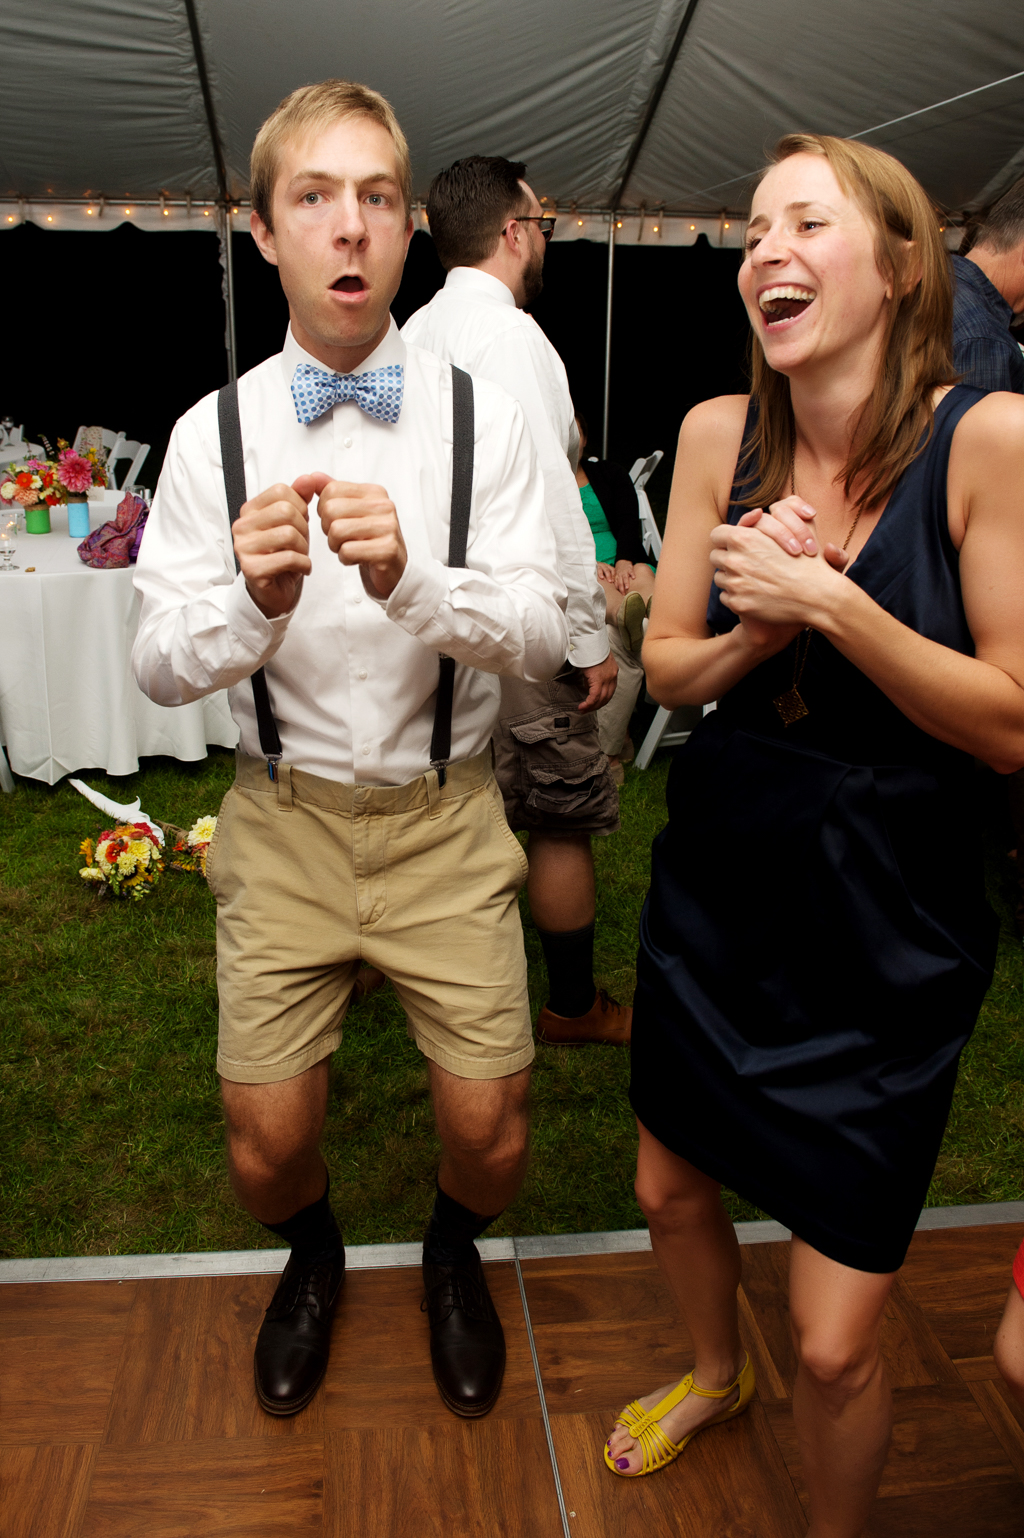 a groomsman dressed in lederhosen makes a girl laugh at the wedding reception